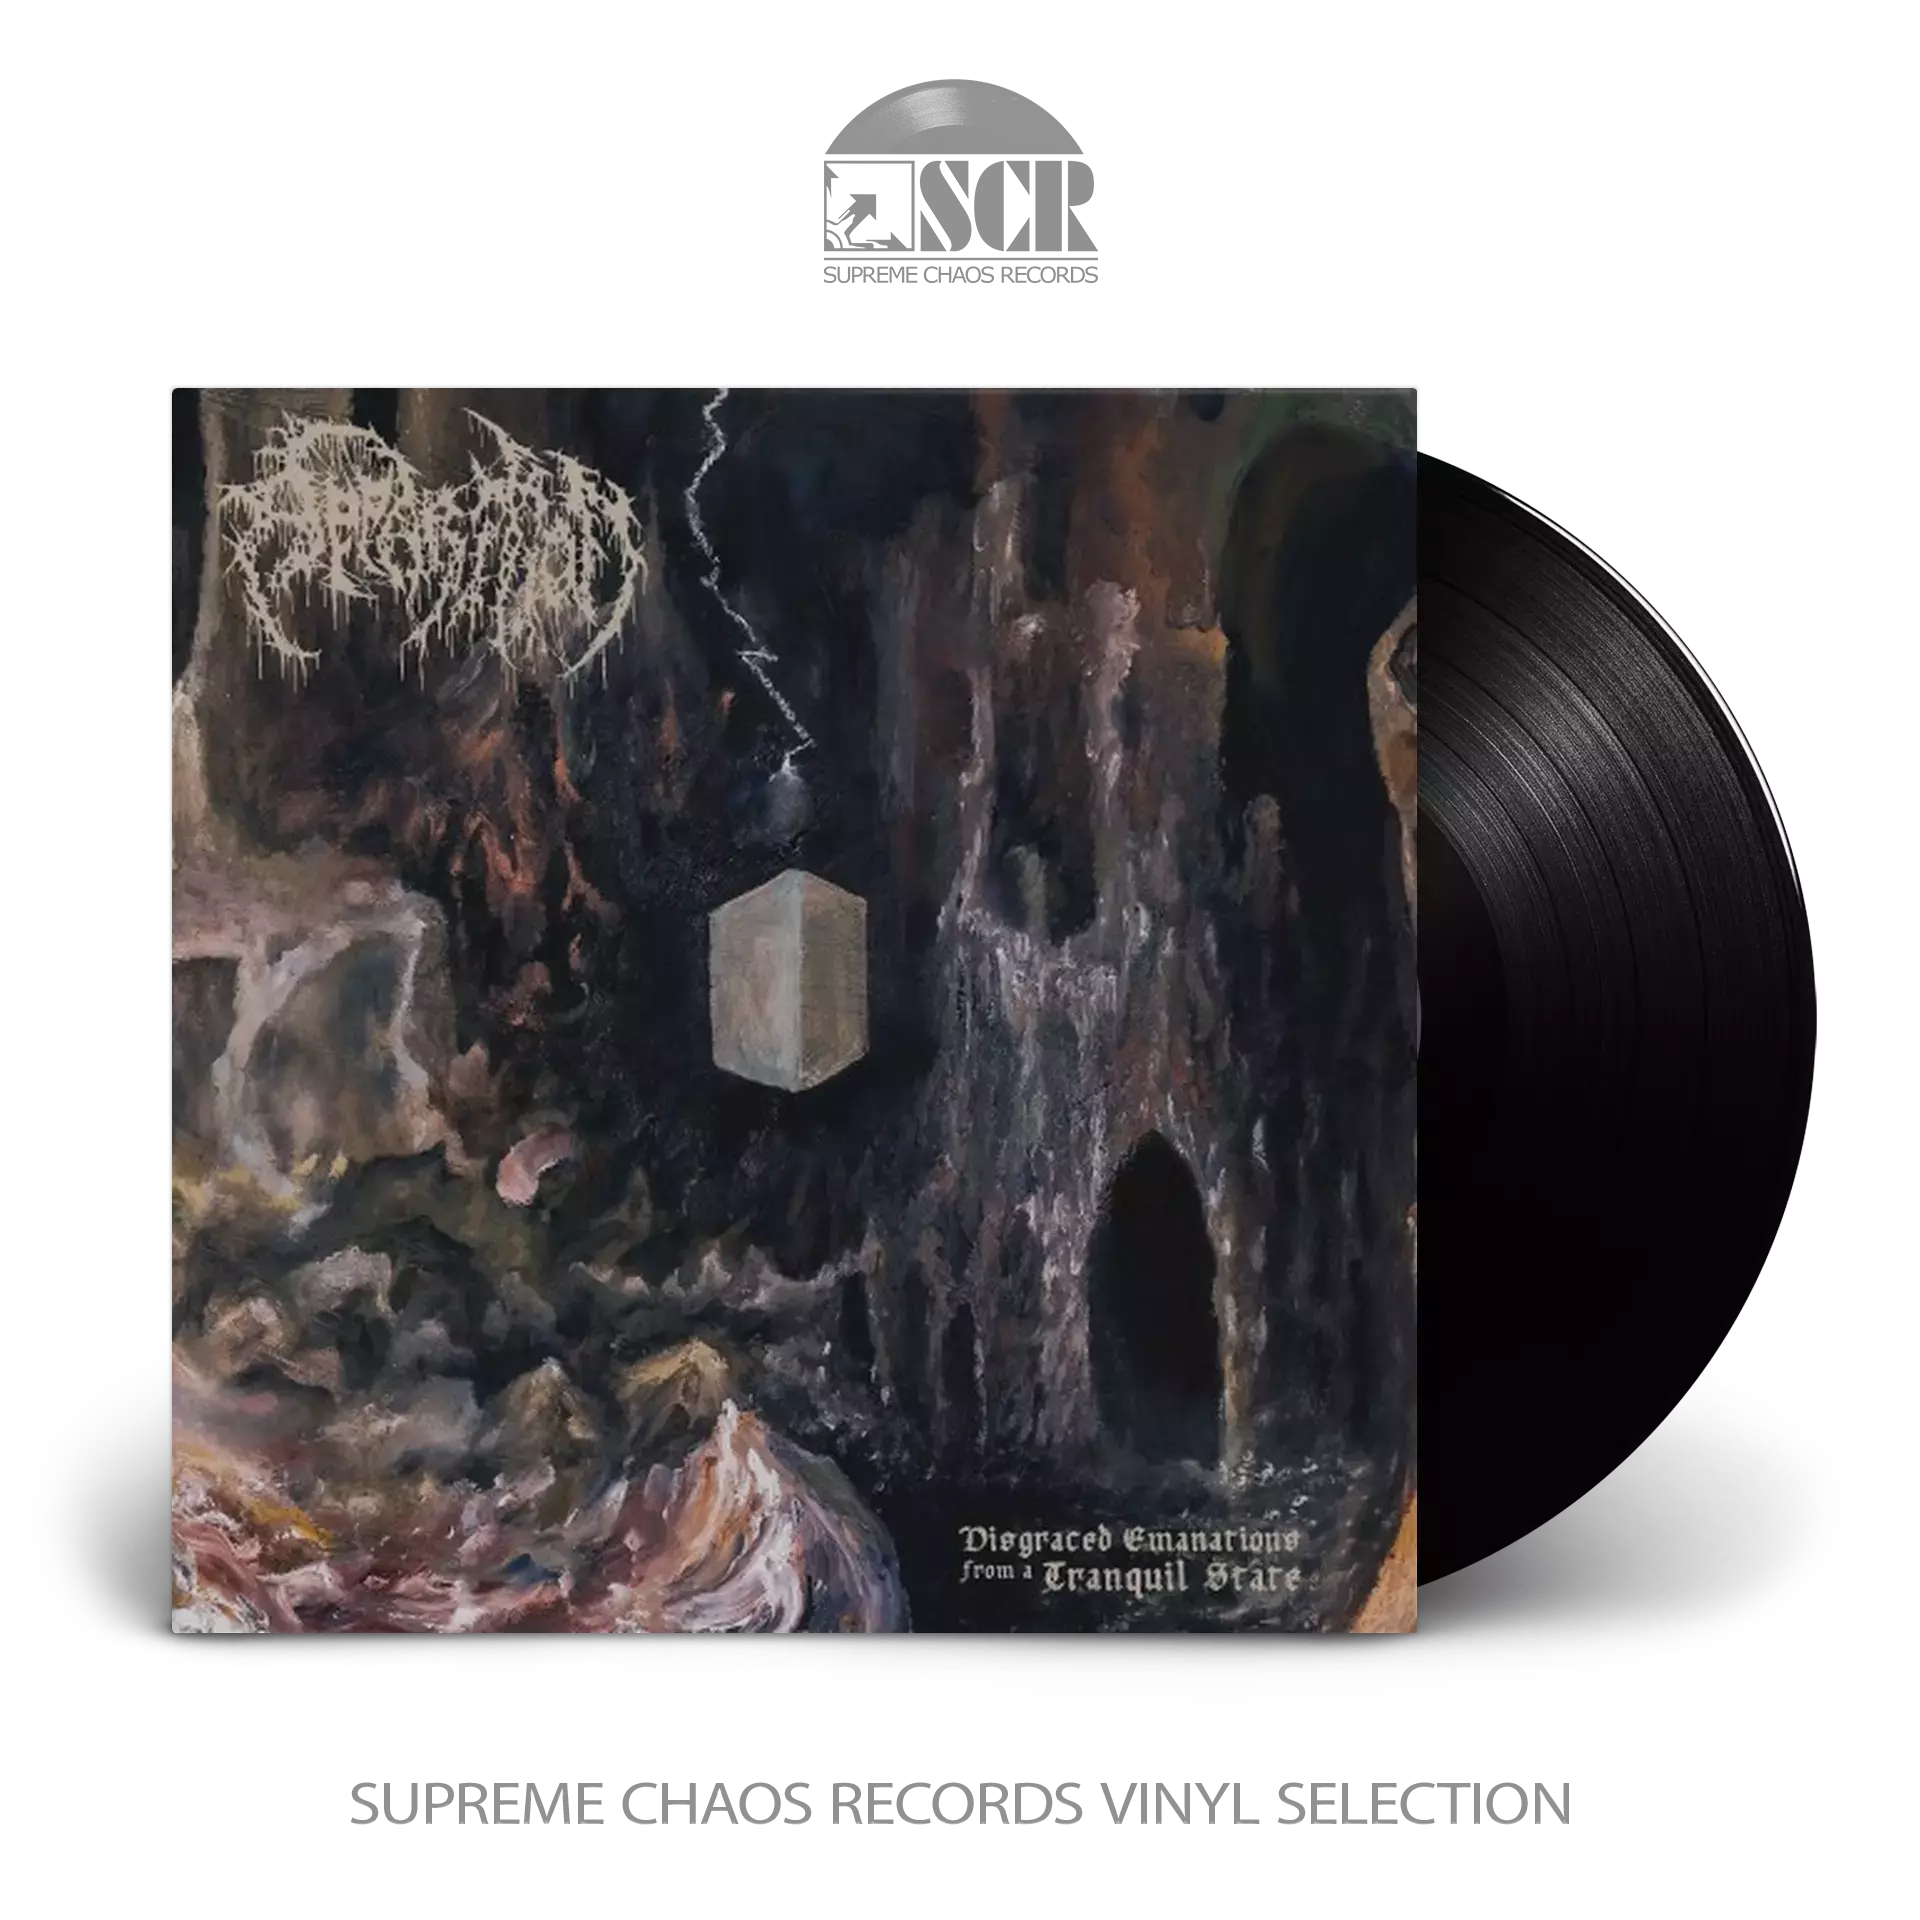 APPARITION - Disgraced Emanations From A Tranquil State [BLACK LP]